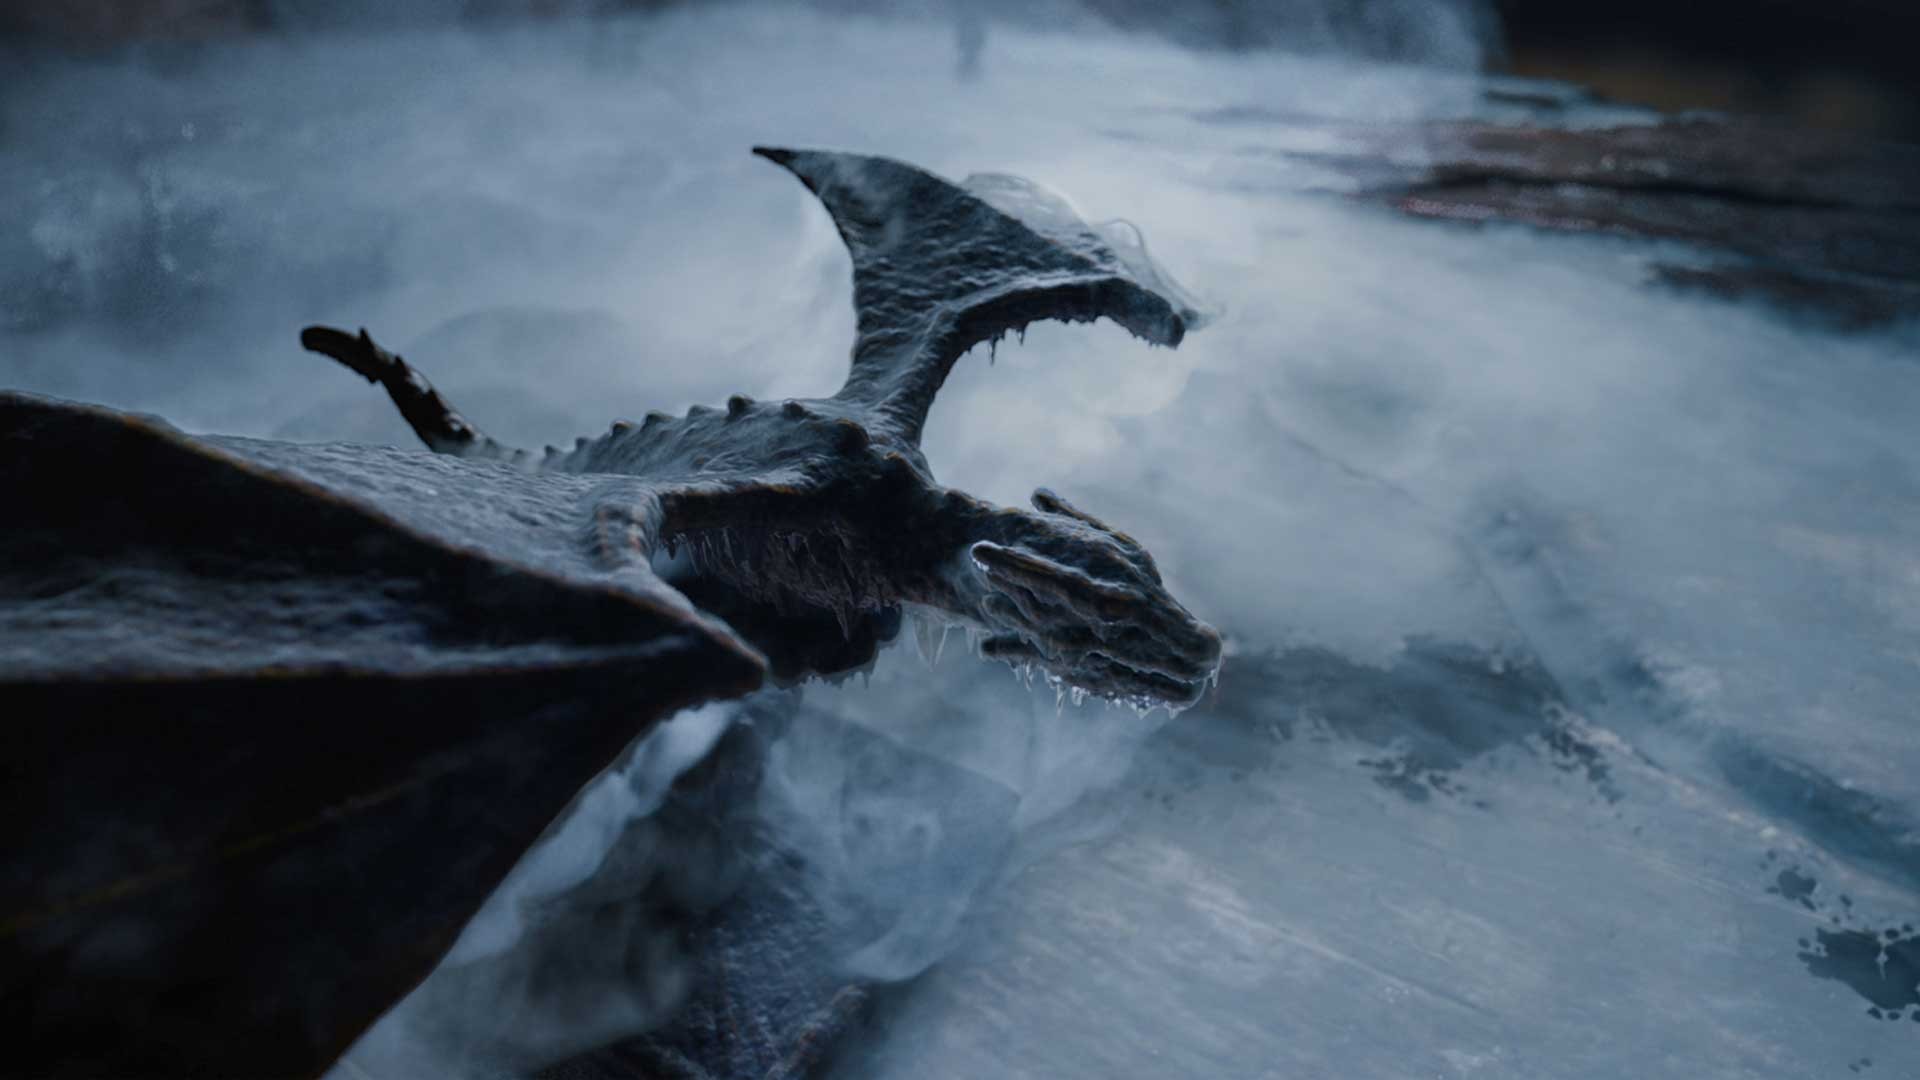 Game of Thrones Season 8 Trailer Wallpaper with high-resolution 1920x1080 pixel. You can use this poster wallpaper for your Desktop Computers, Mac Screensavers, Windows Backgrounds, iPhone Wallpapers, Tablet or Android Lock screen and another Mobile device